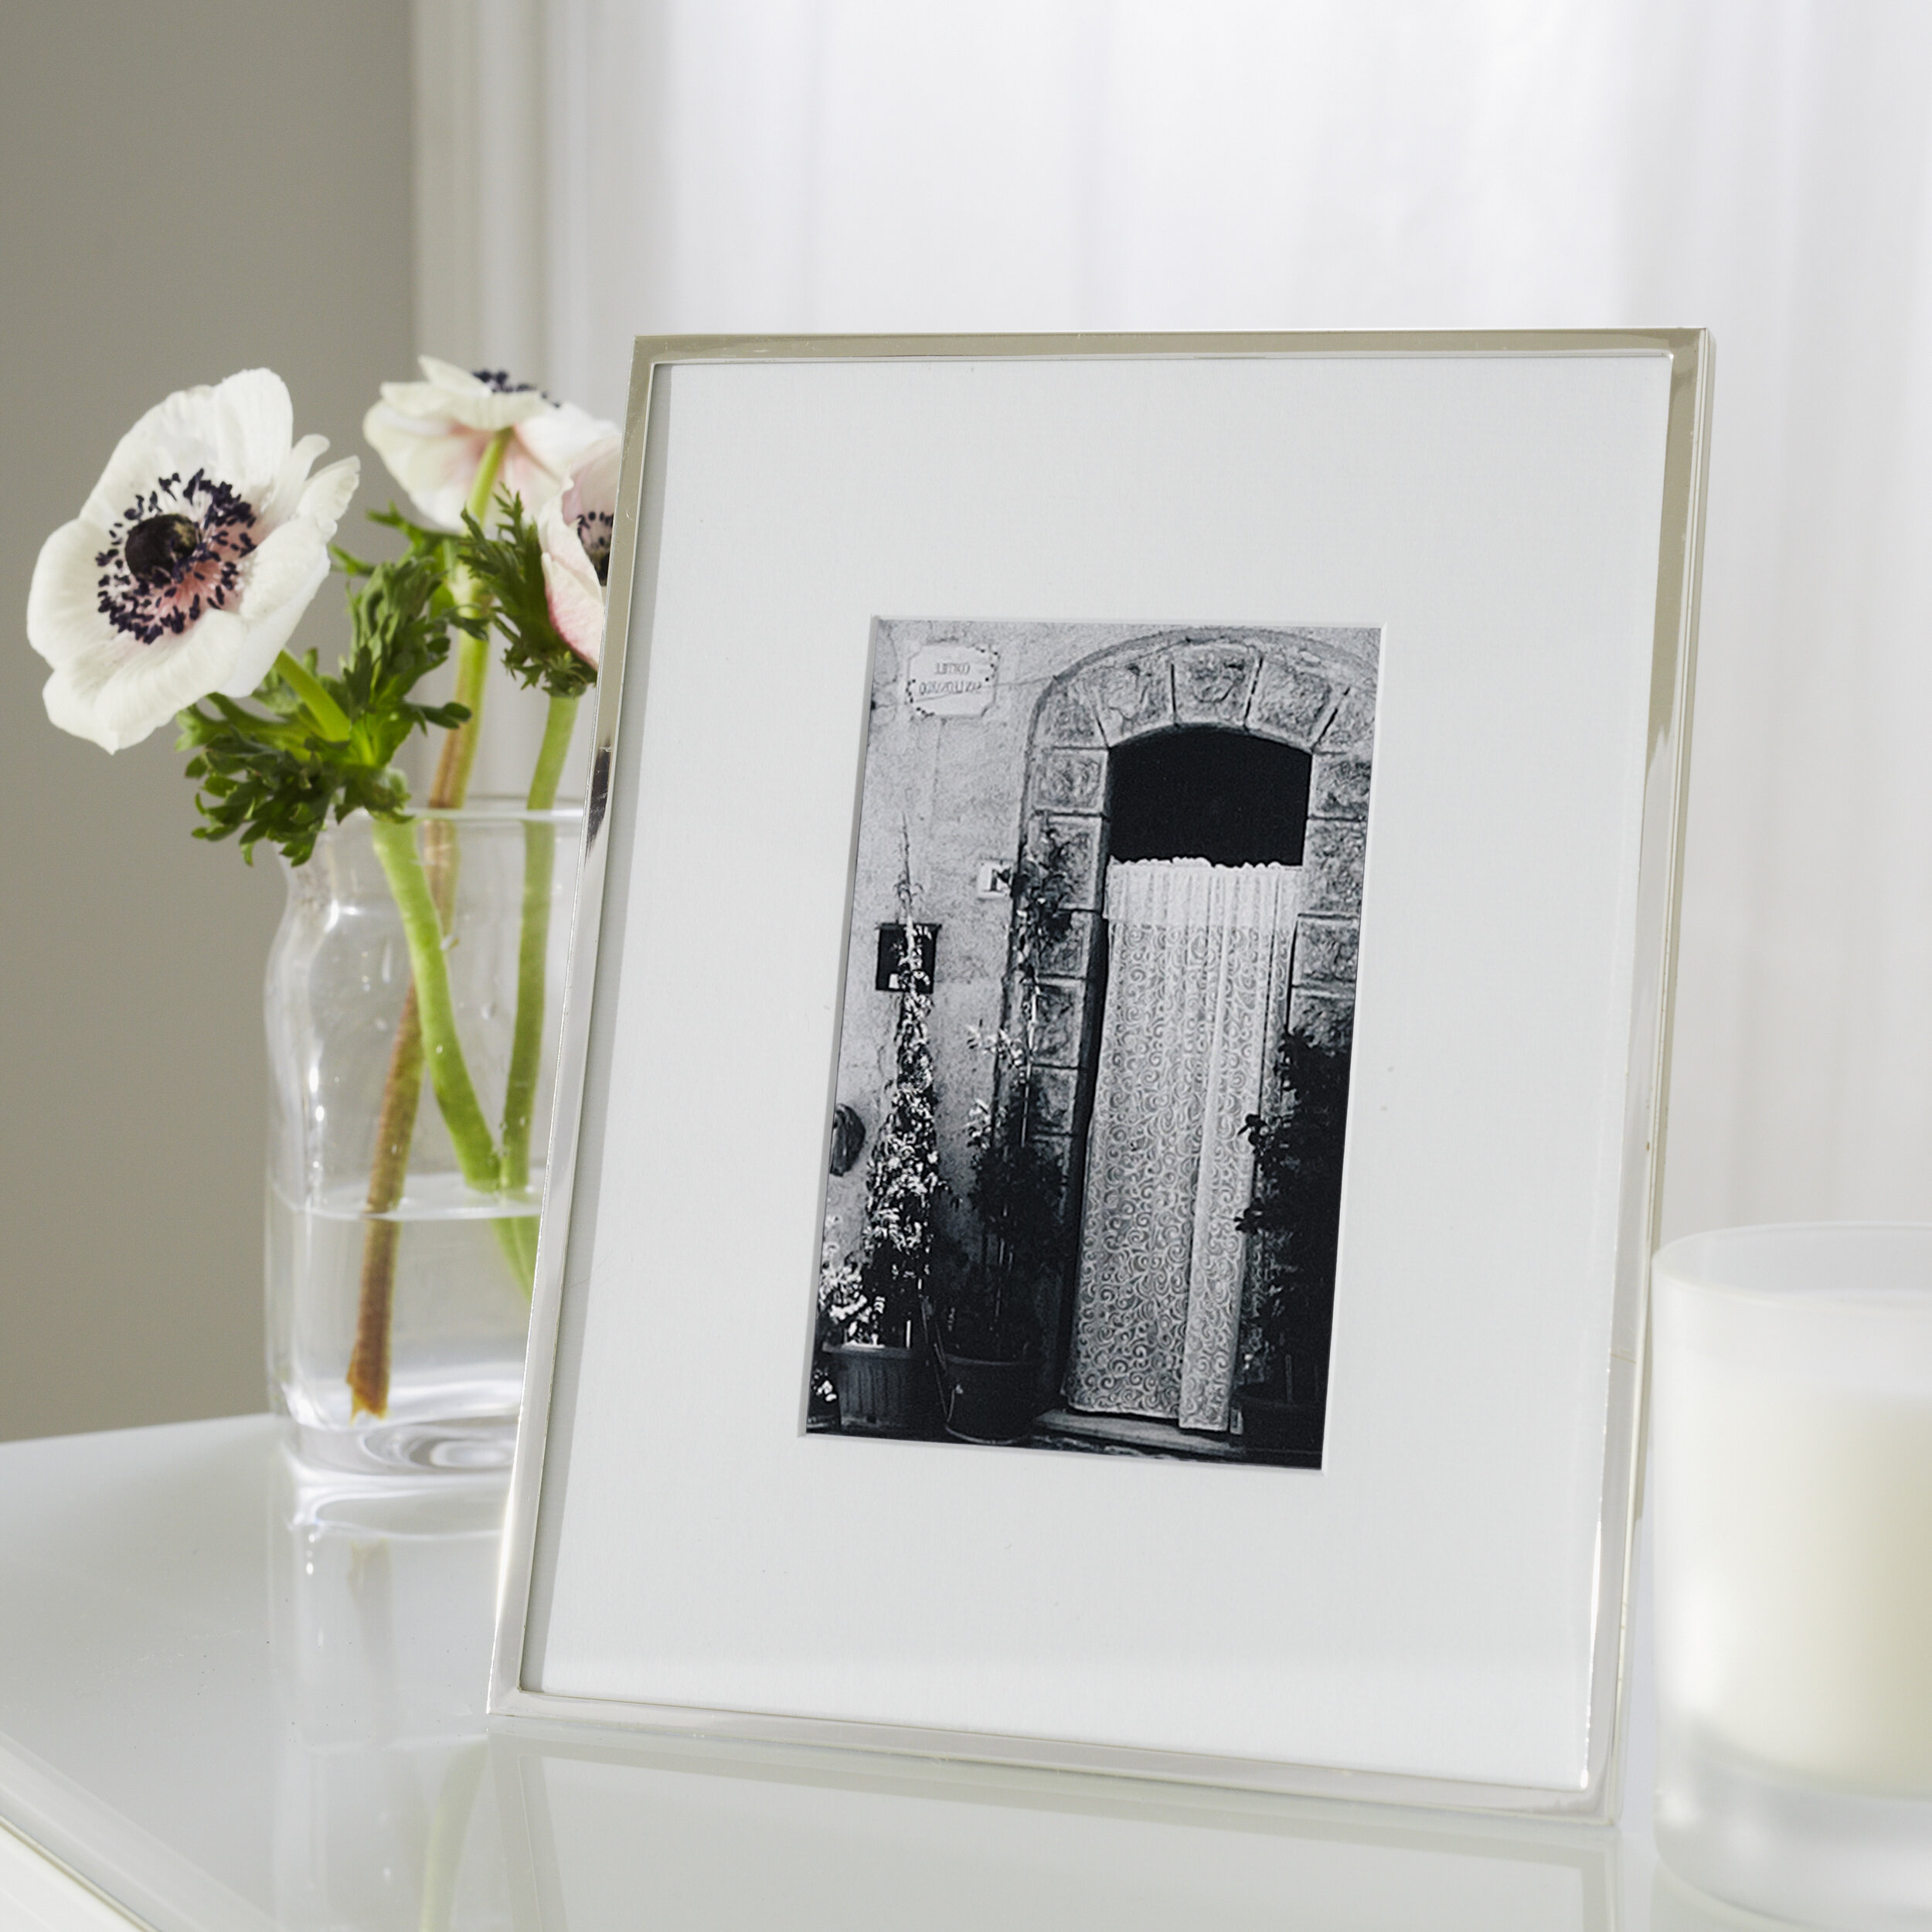 The White Company Silver Plated Photo Frame, £35